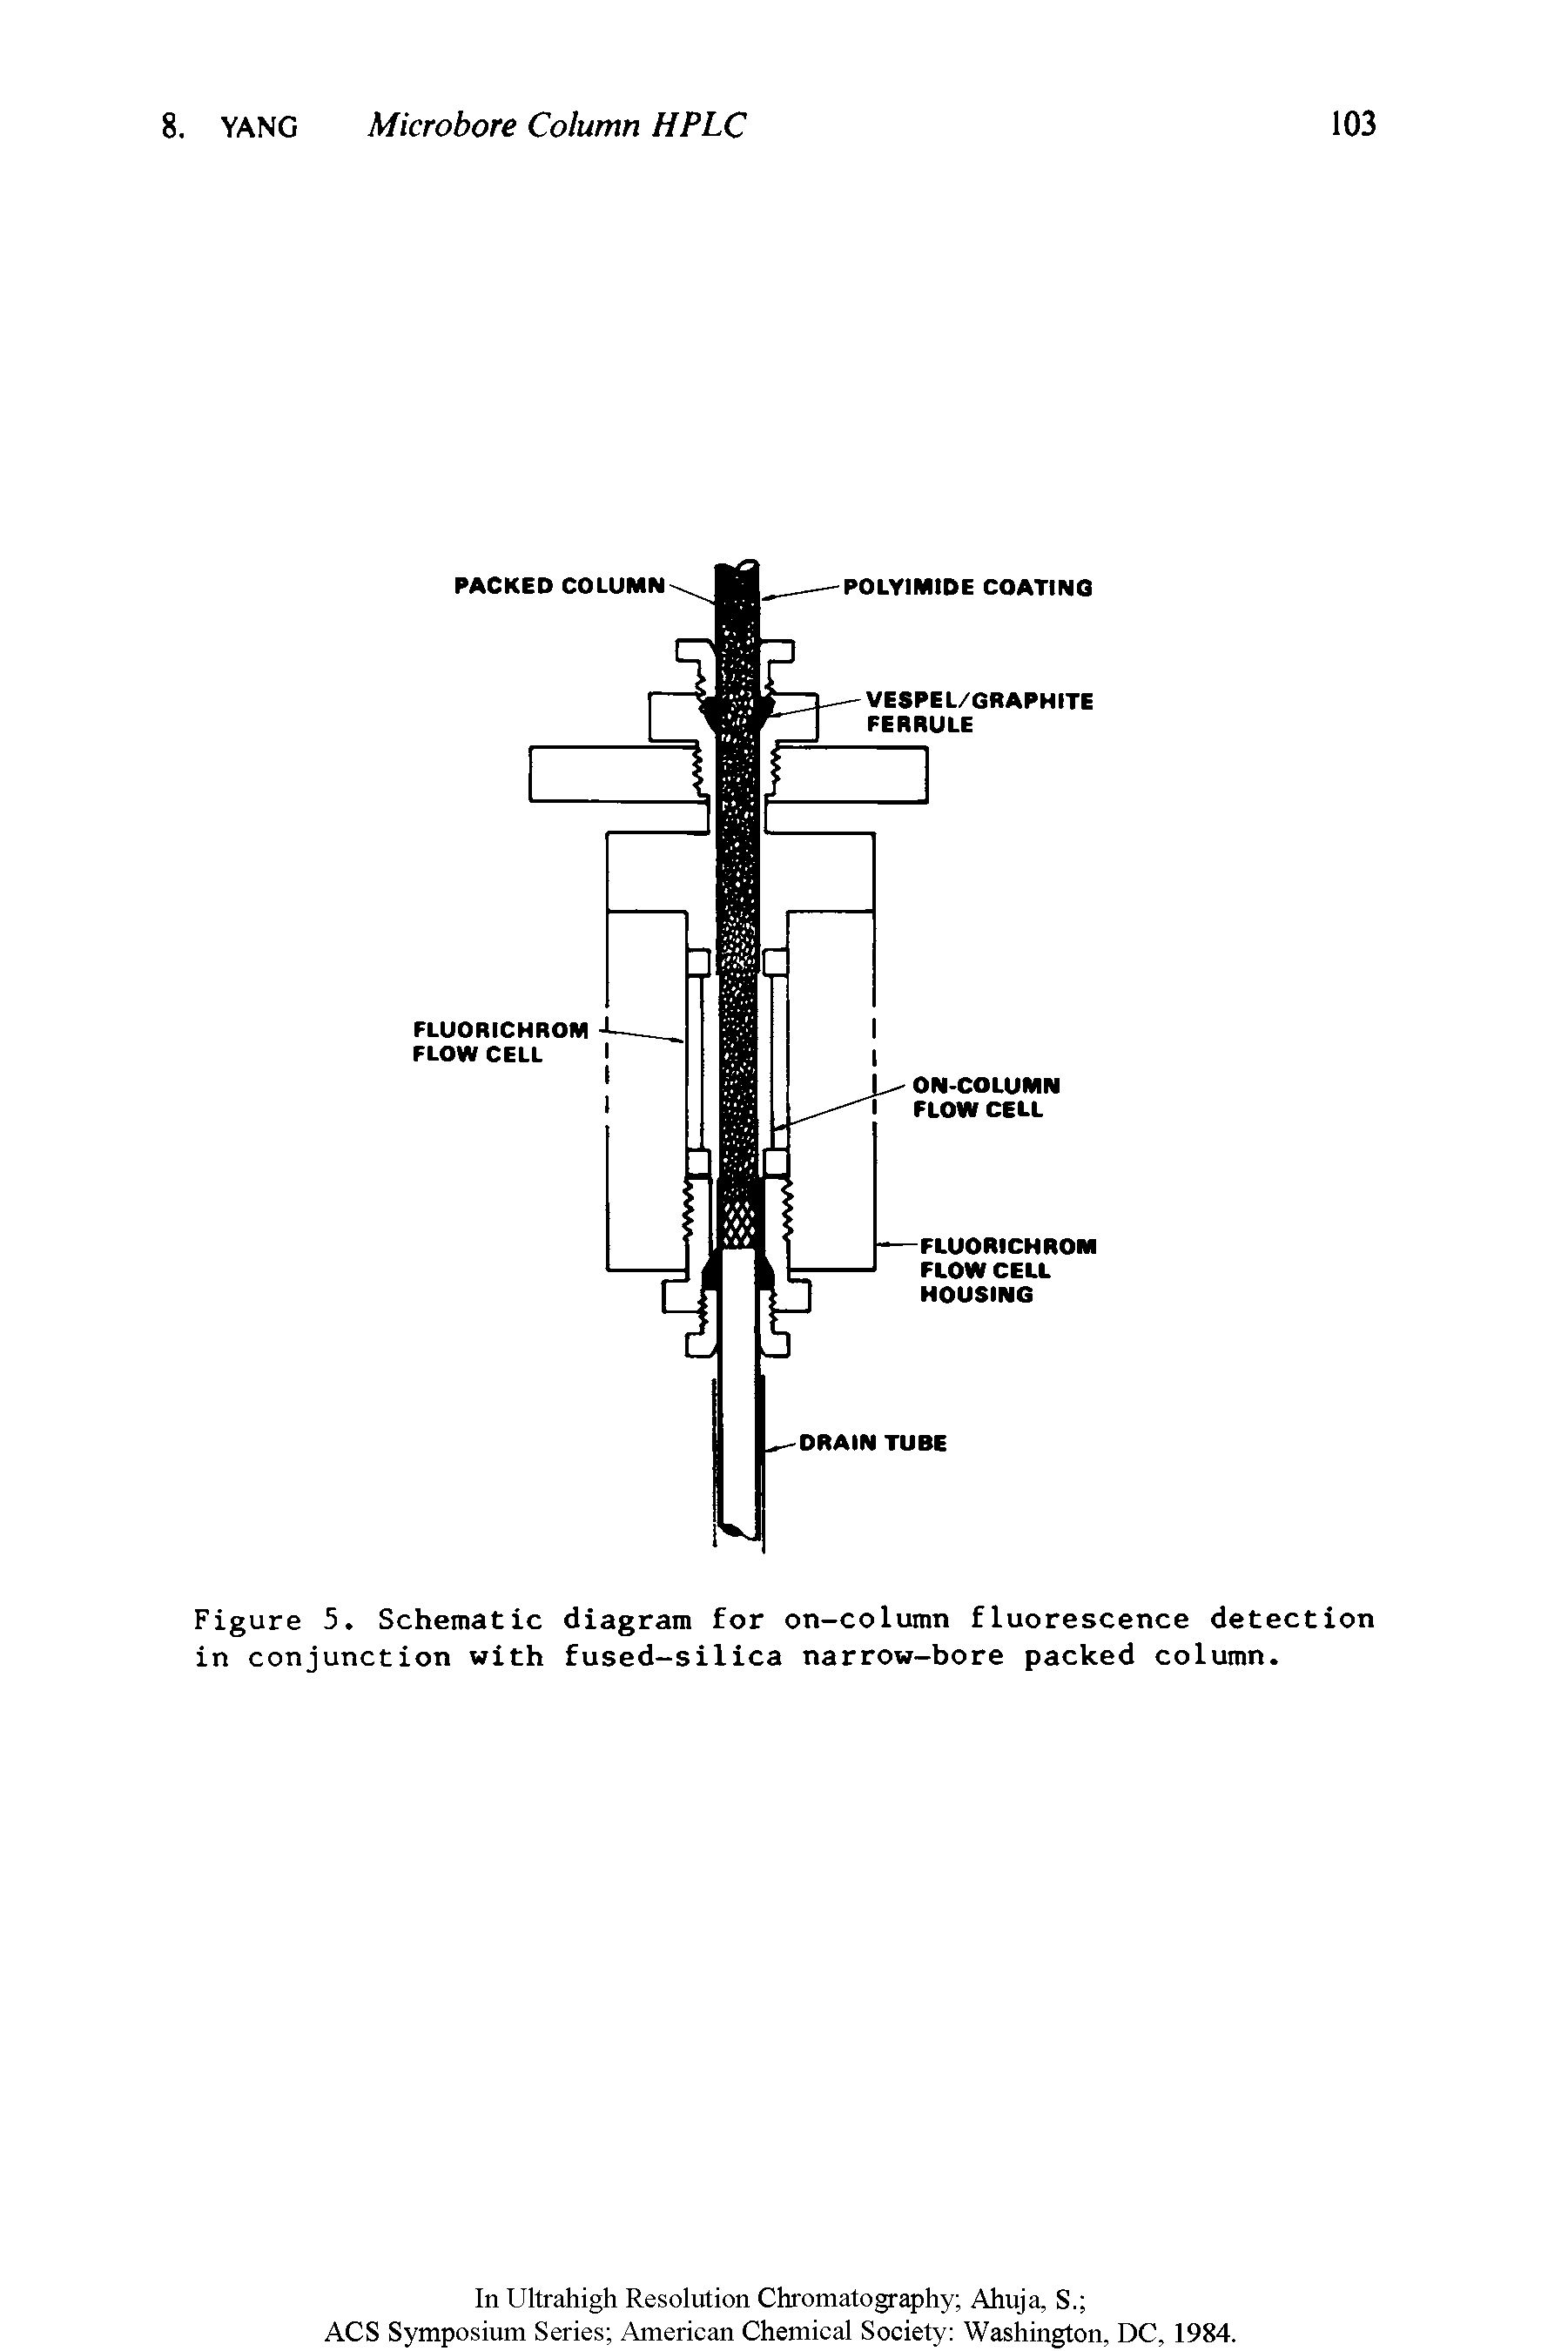 Figure 5. Schematic diagram for on-column fluorescence detection in conjunction with fused-silica narrow-bore packed column.